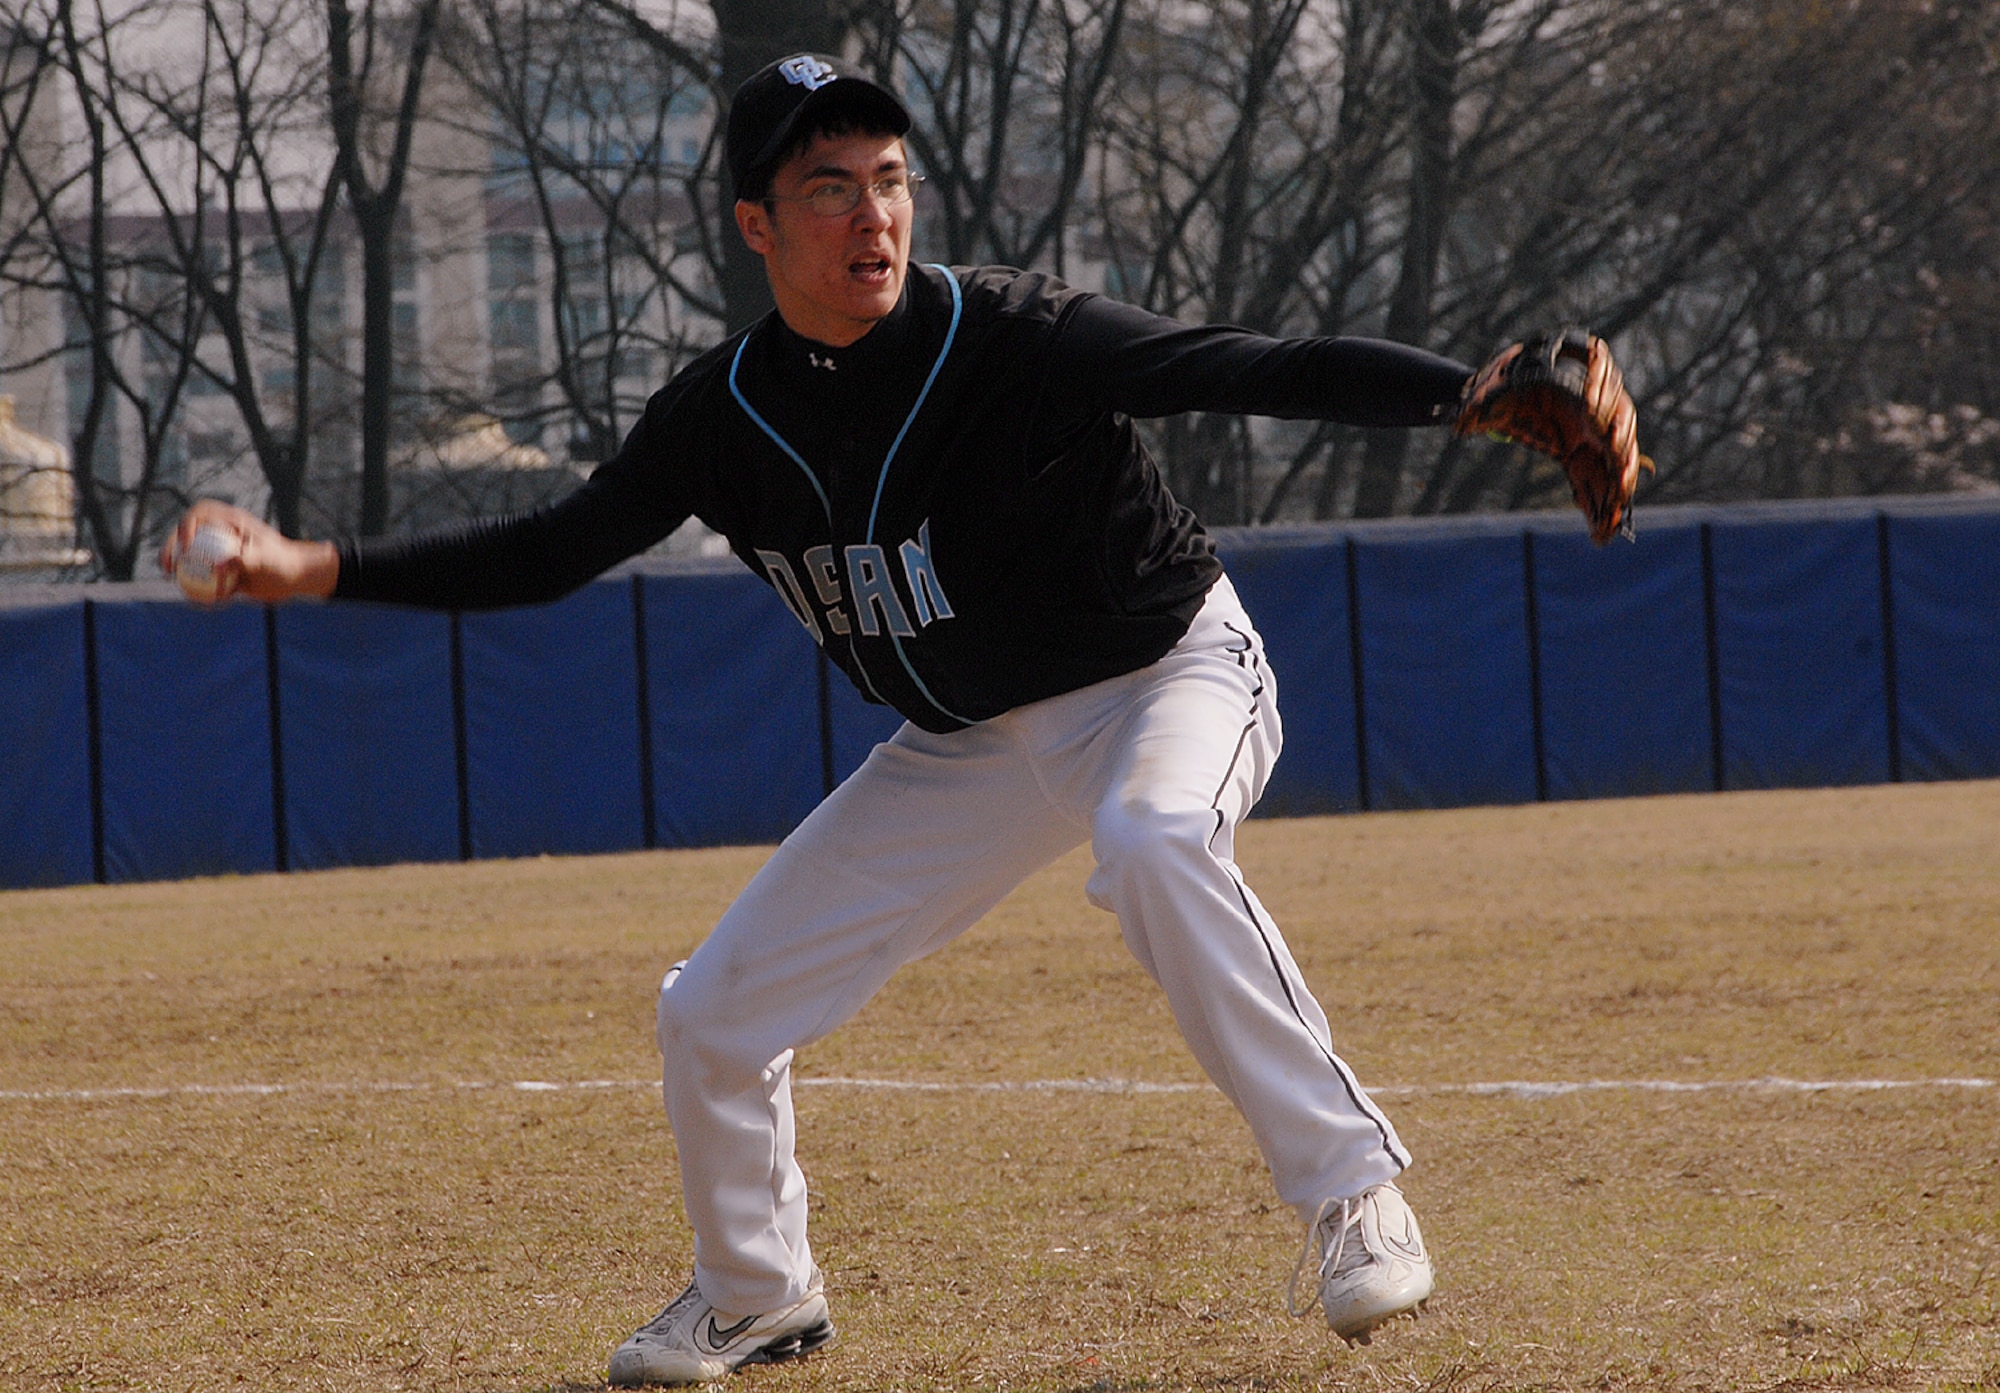 CHEONAN, Republic of Korea --  John Apelin tries to beat a runner to the plate as the Osan American High School Cougars and Cheonan Bukil High School baseball teams faced each other for the first time April 6. (U.S. Air Force photo by Airman 1s Class Chad Strohmeyer)